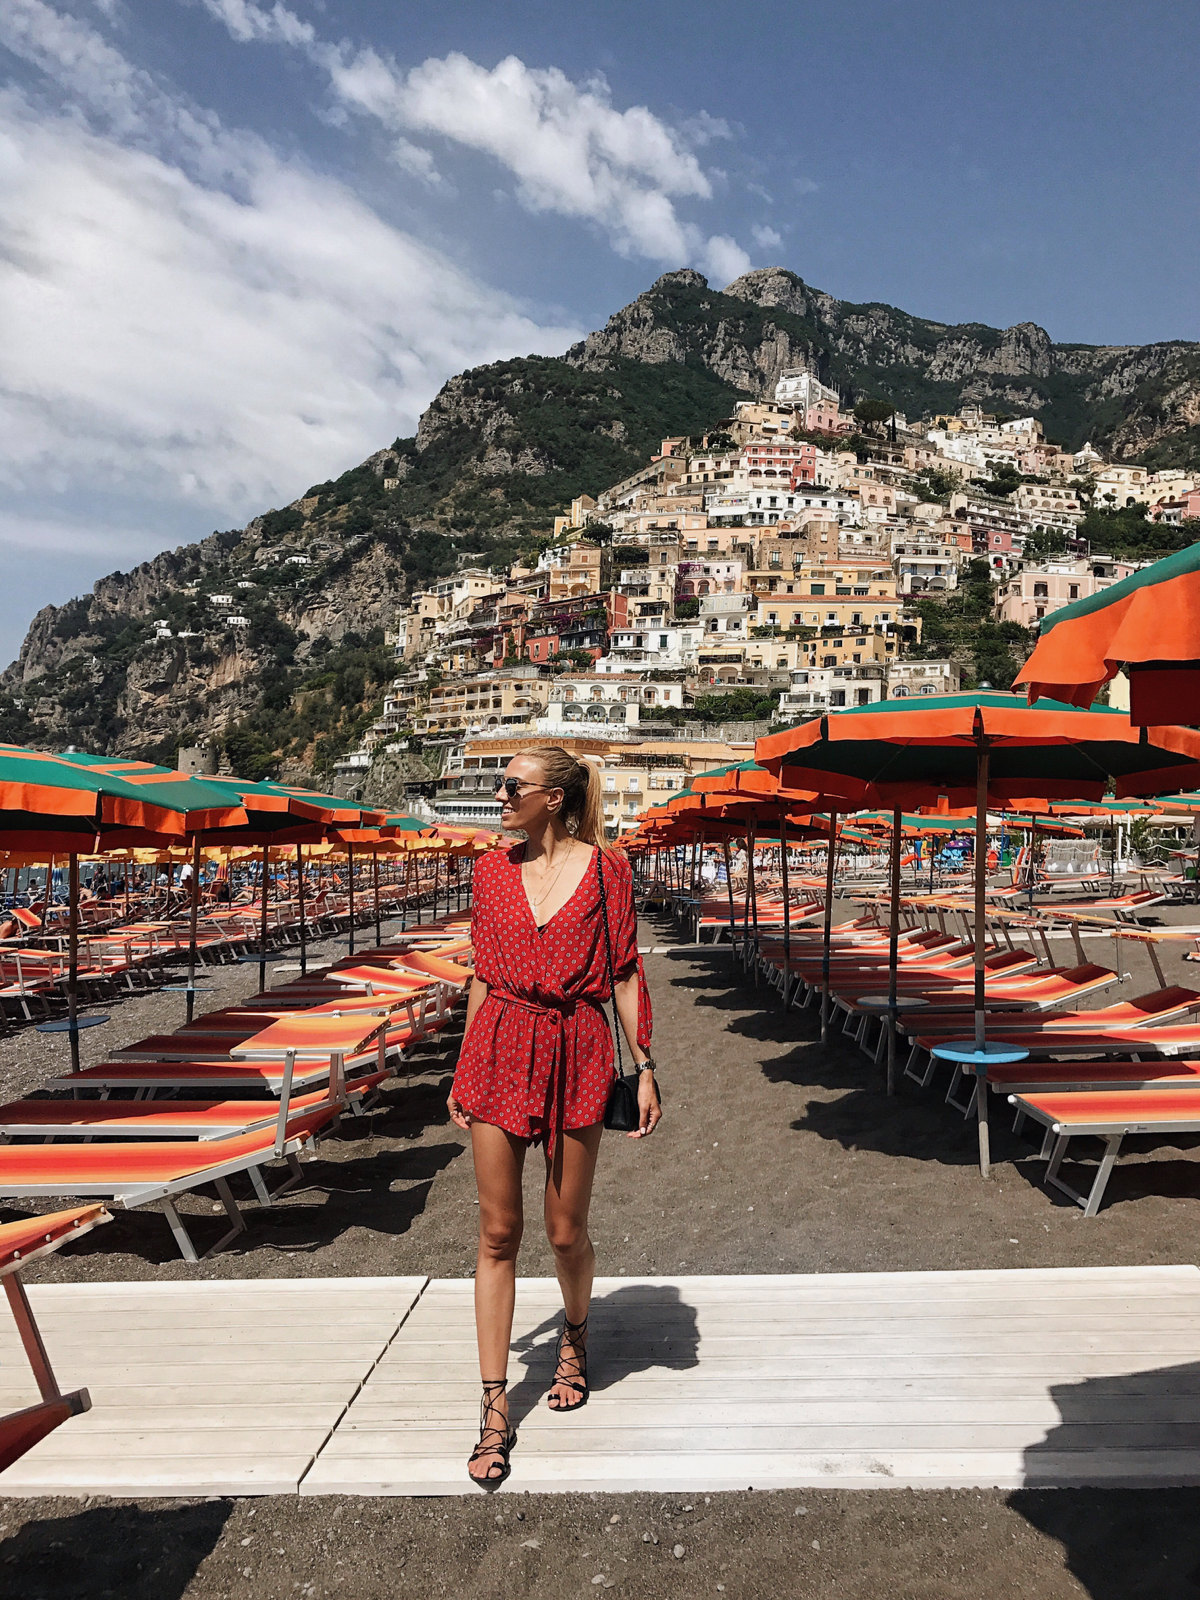 https://lisadcahue.com/wp-content/uploads/2017/07/Positano-Travel-Guide-What-to-do-in-Positano-Italy-Amalfi-Coast-Top-Things-to-do-in-Positano-Travel-Blogger-1-of-35-12.jpg